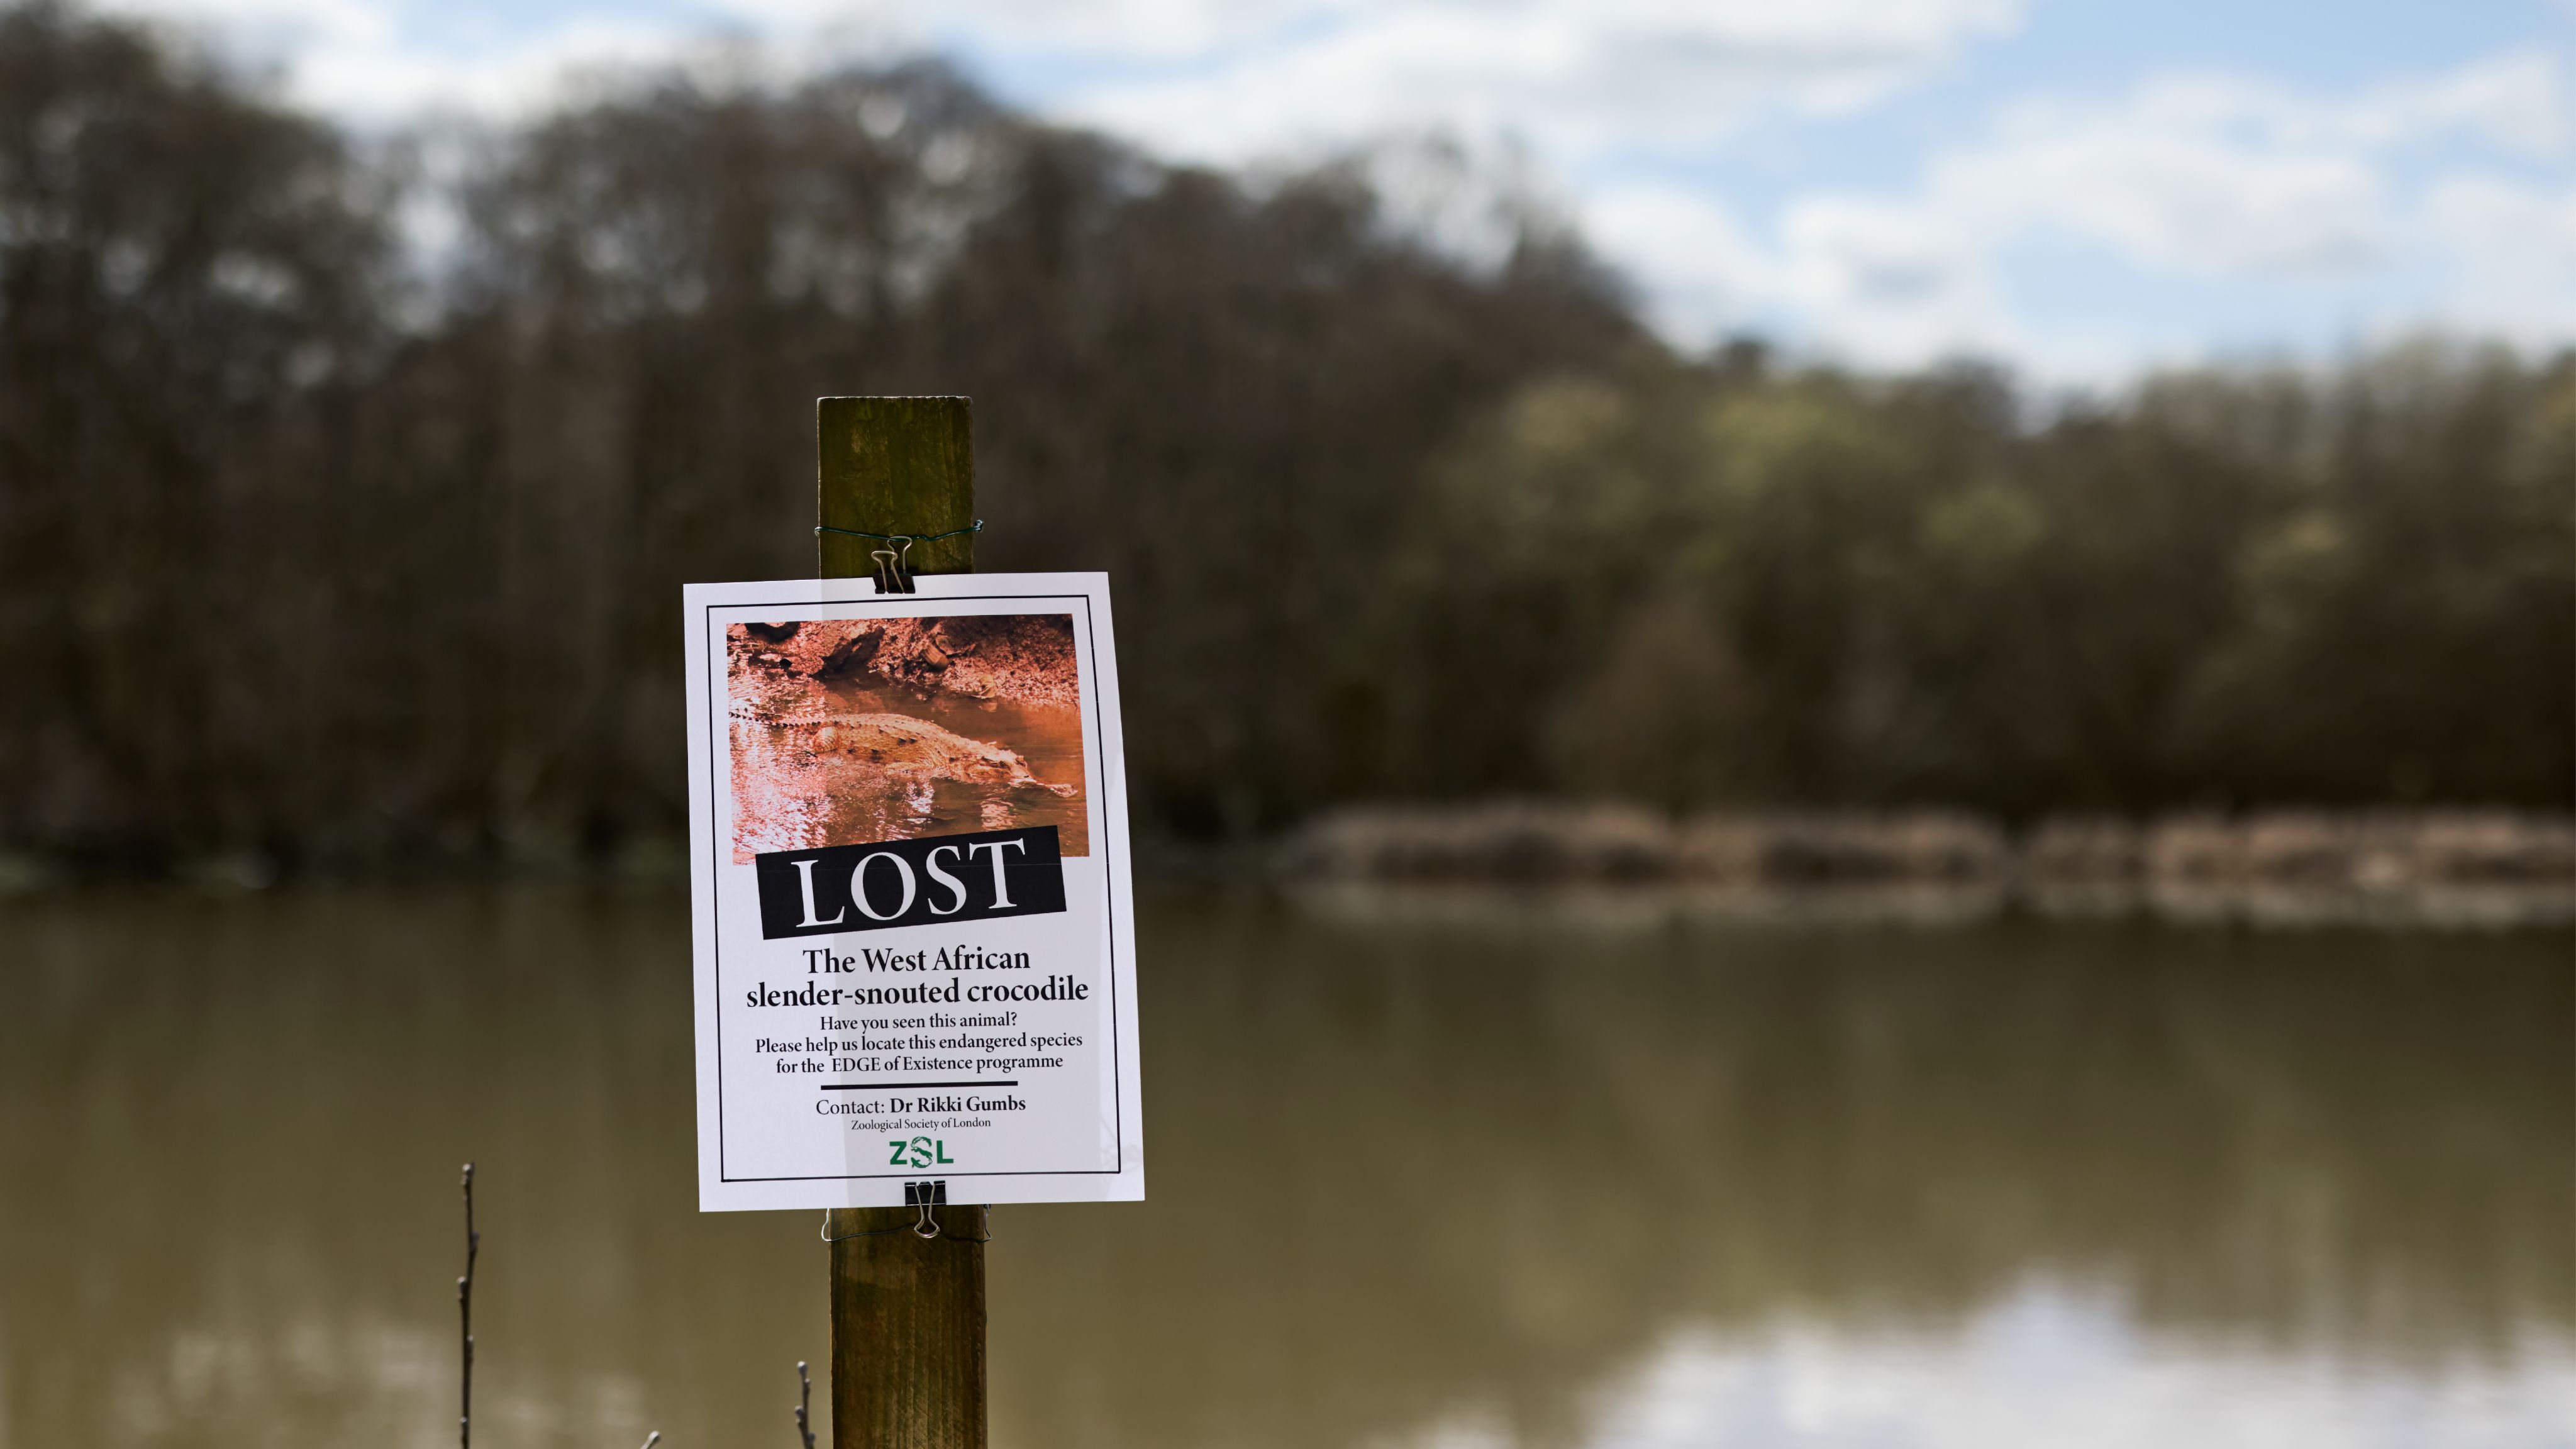 A sign in front of a lake, looking for a missing crocodile, which is at risk of extinction